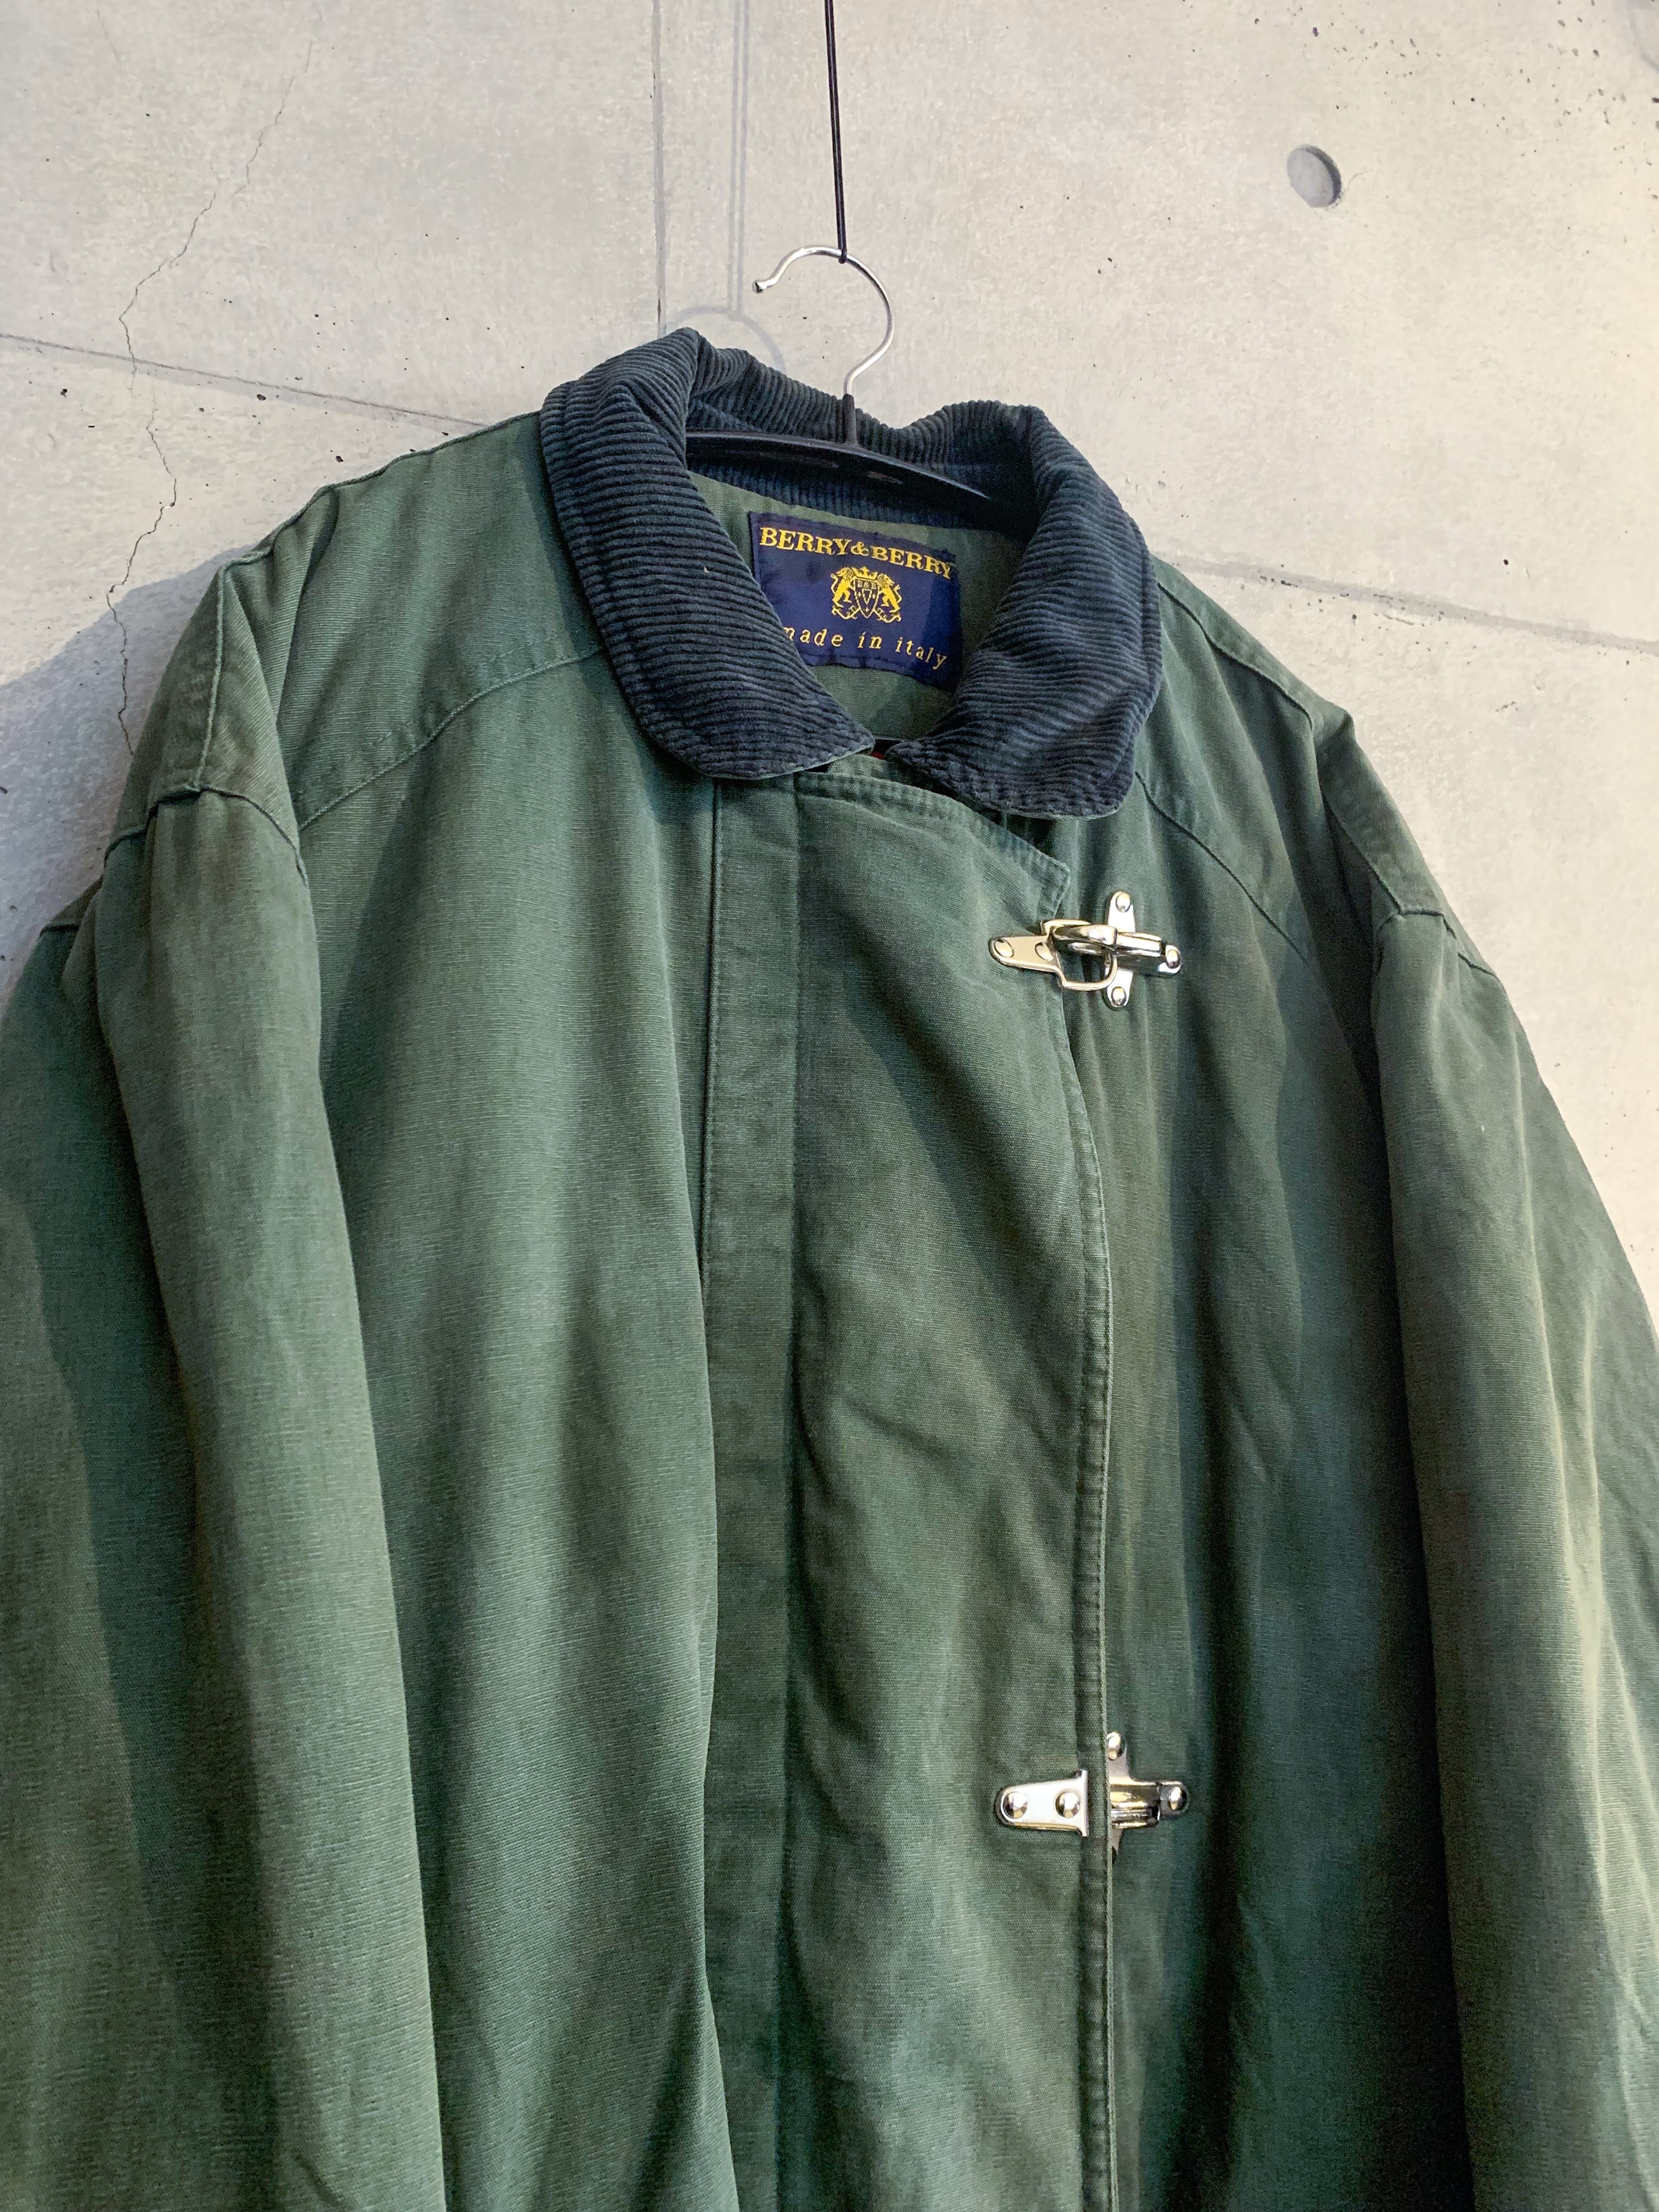 70's Fireman Jacket made in Italy ライナー付-